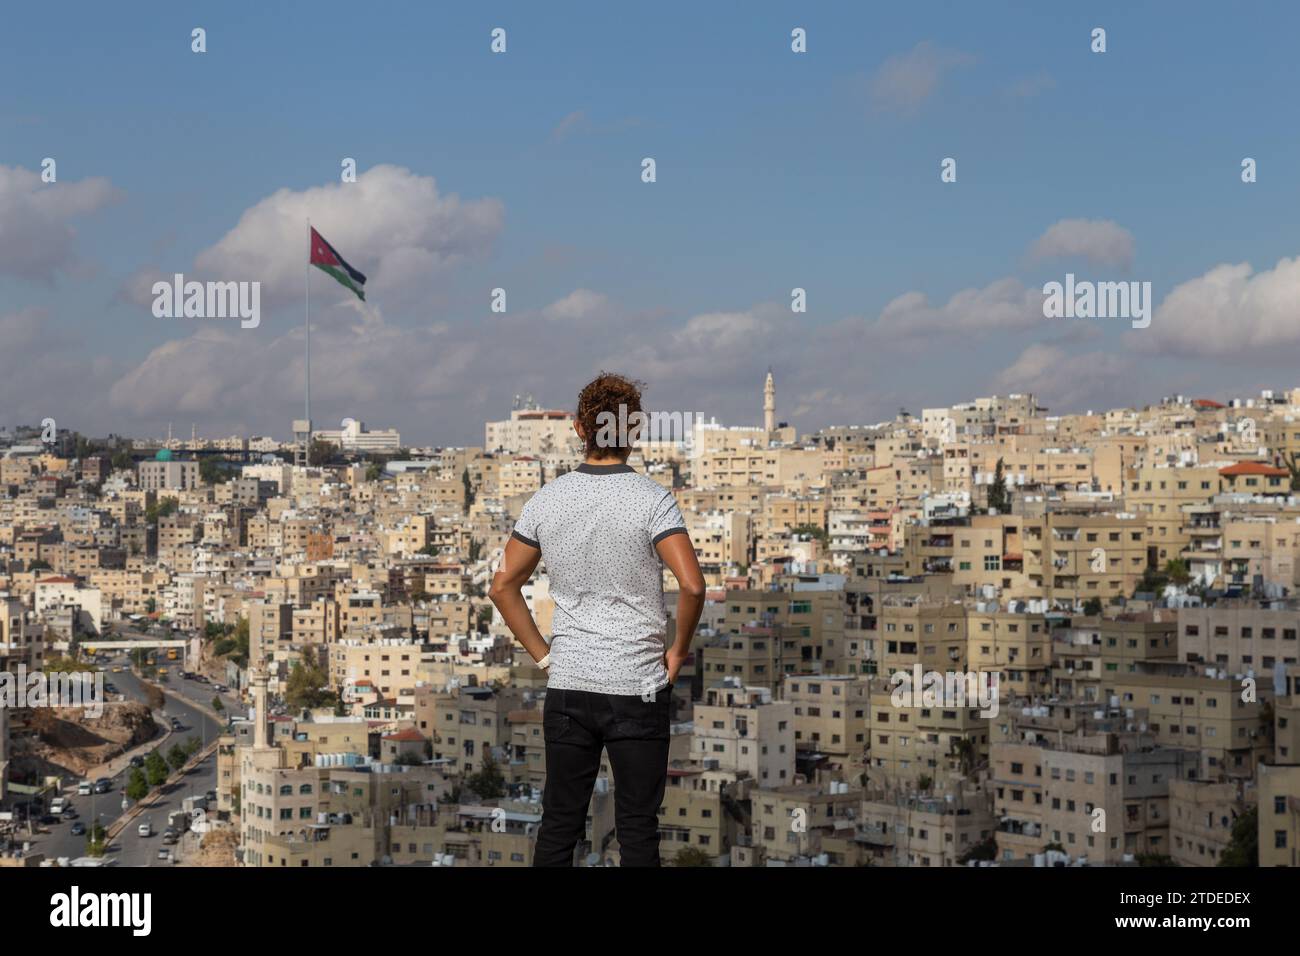 Male tourist looking at Amman's cityscape during sunny day Stock Photo